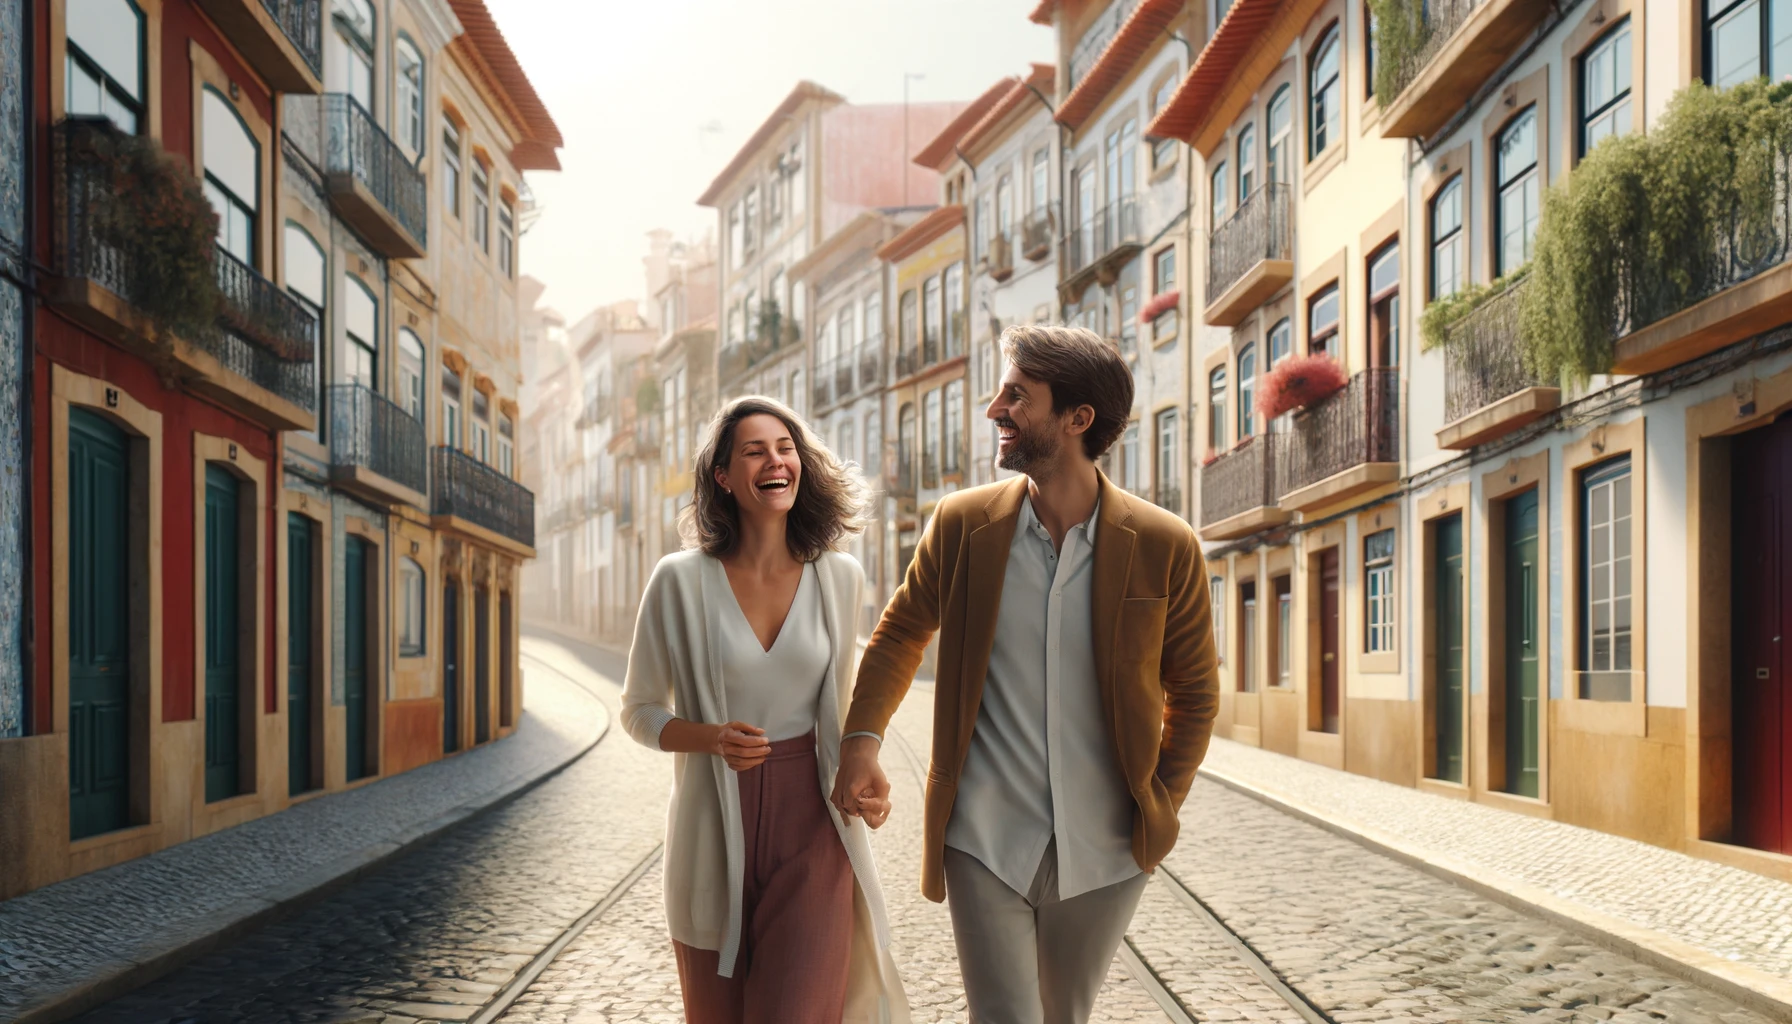 A couple in their mid-30s walking along a cobblestone street in a charming Portuguese town, holding hands and laughing, with colorful buildings featuring traditional Portuguese architecture in the background.